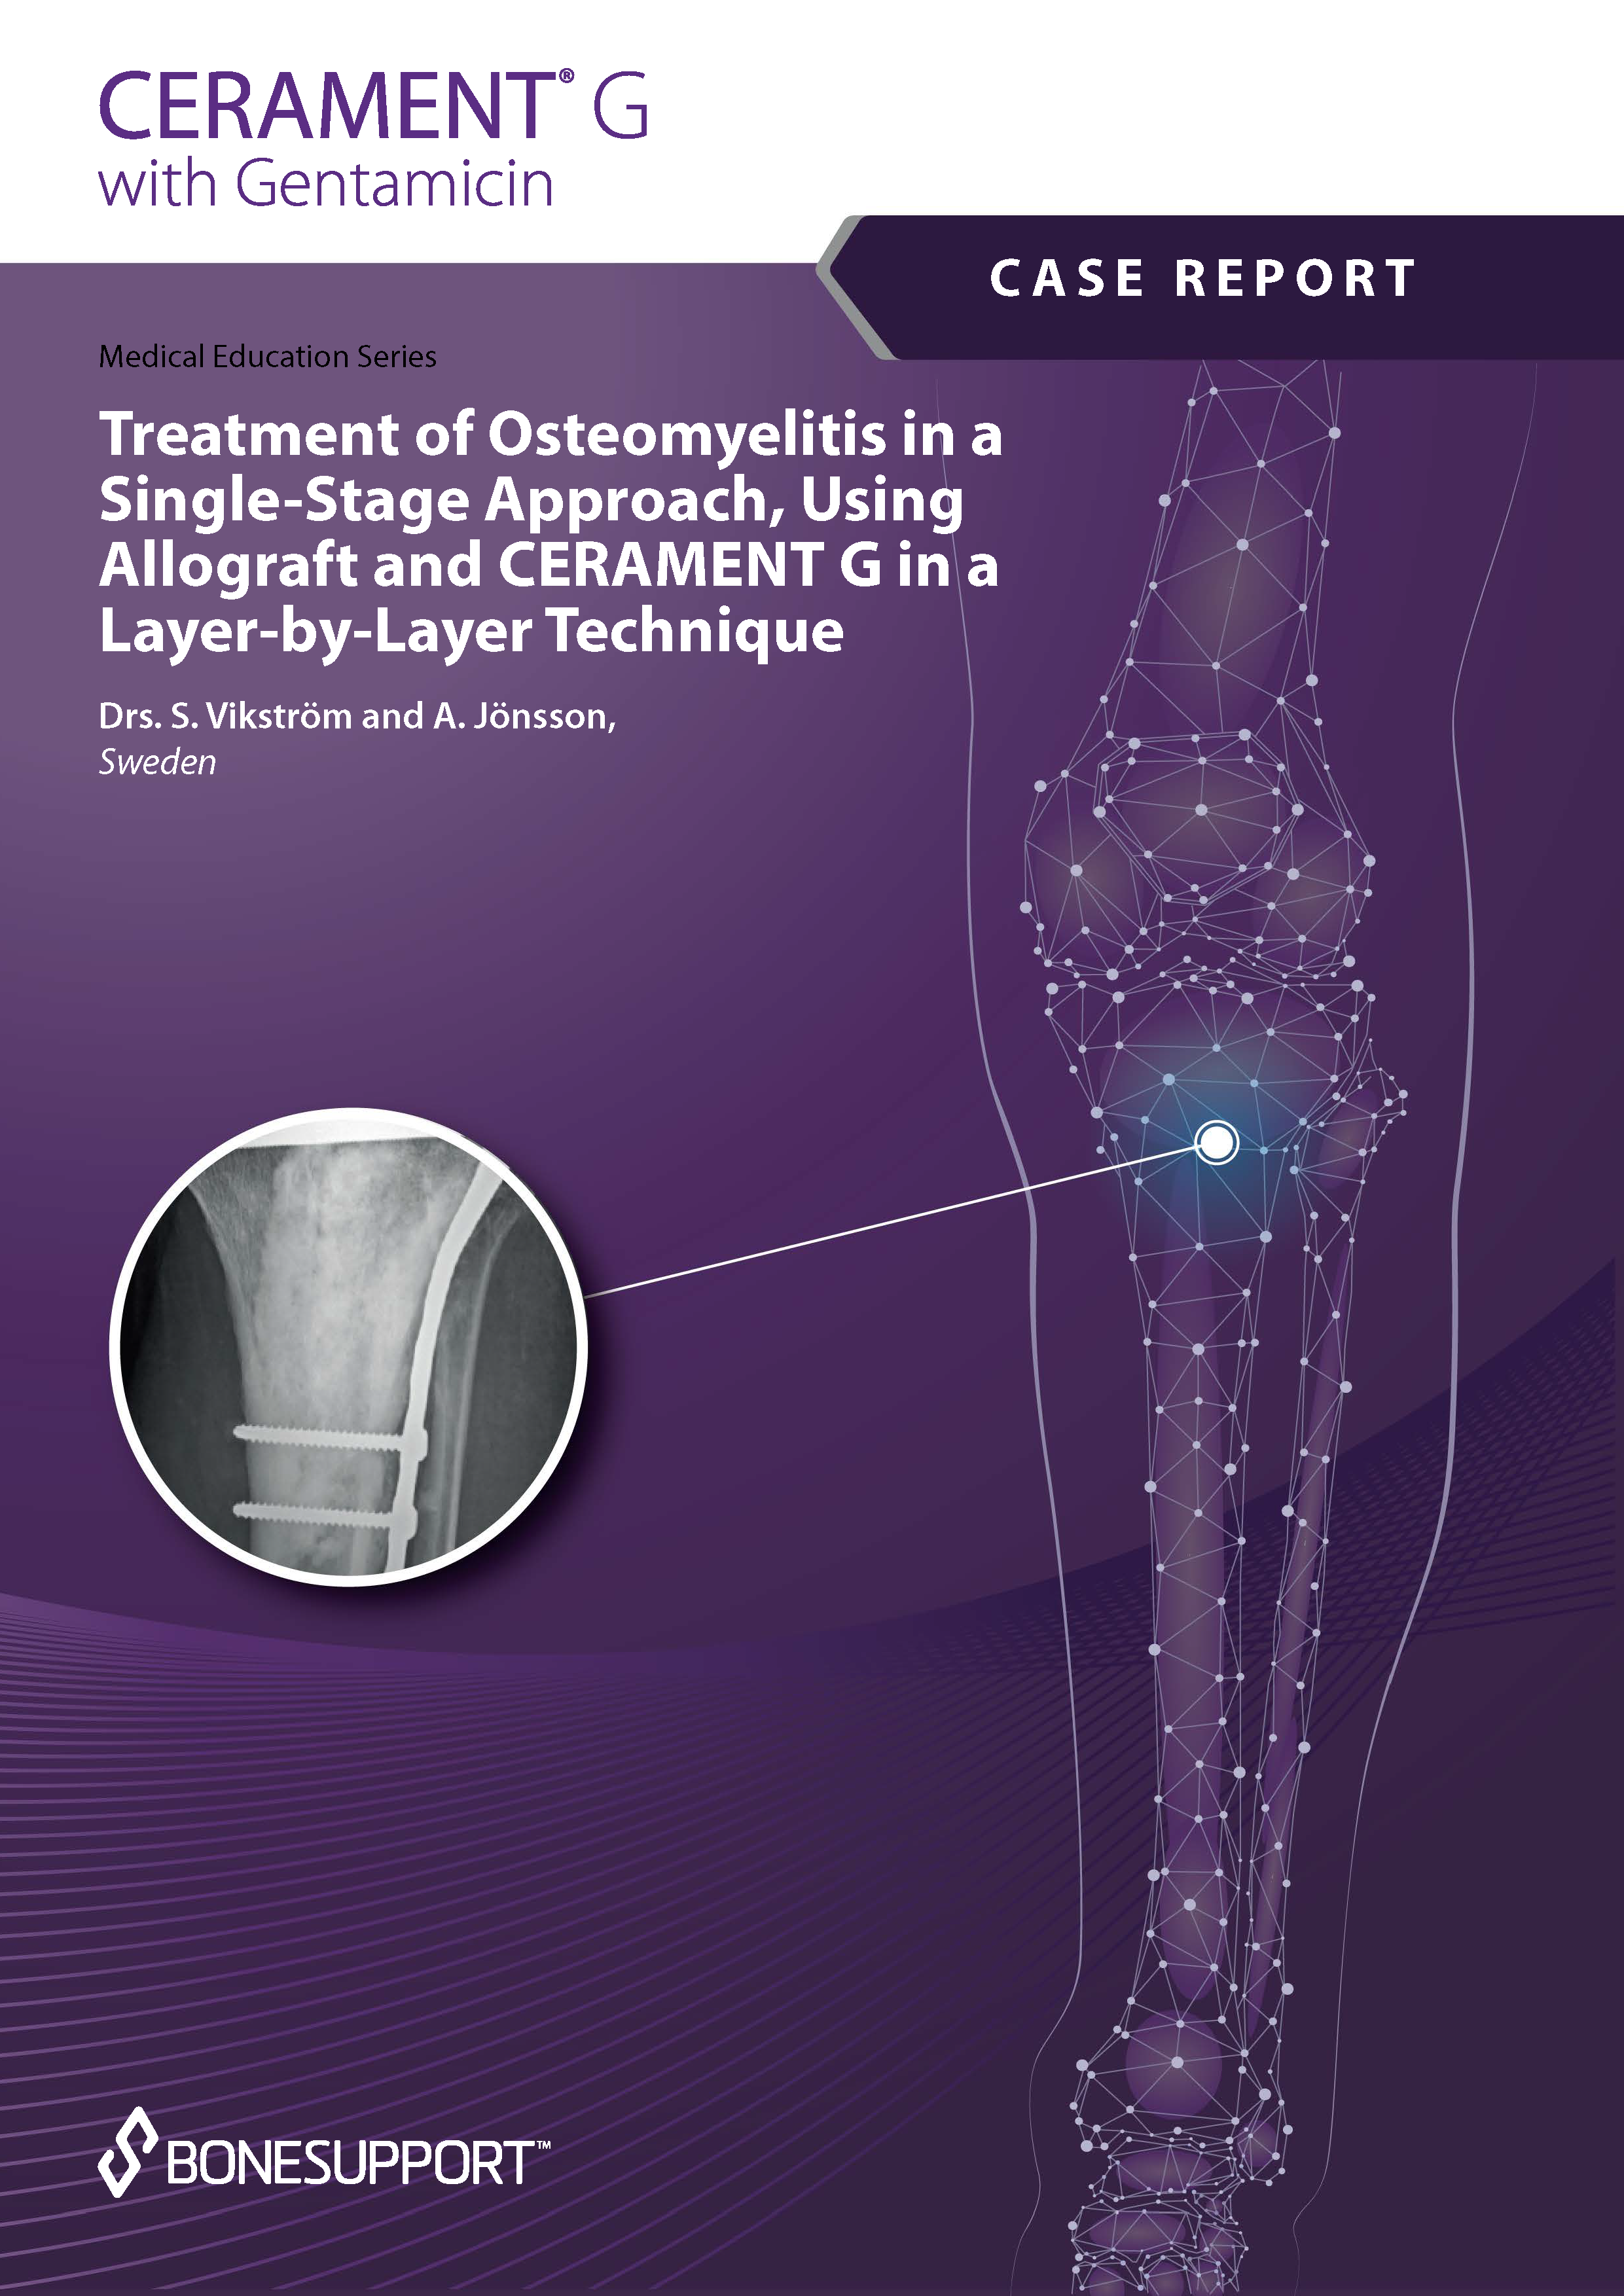 Vikstrom – Treatment of osteomyelitis in a single-stage approach, using allograft and CERAMENT G in a layer-by-layer technique